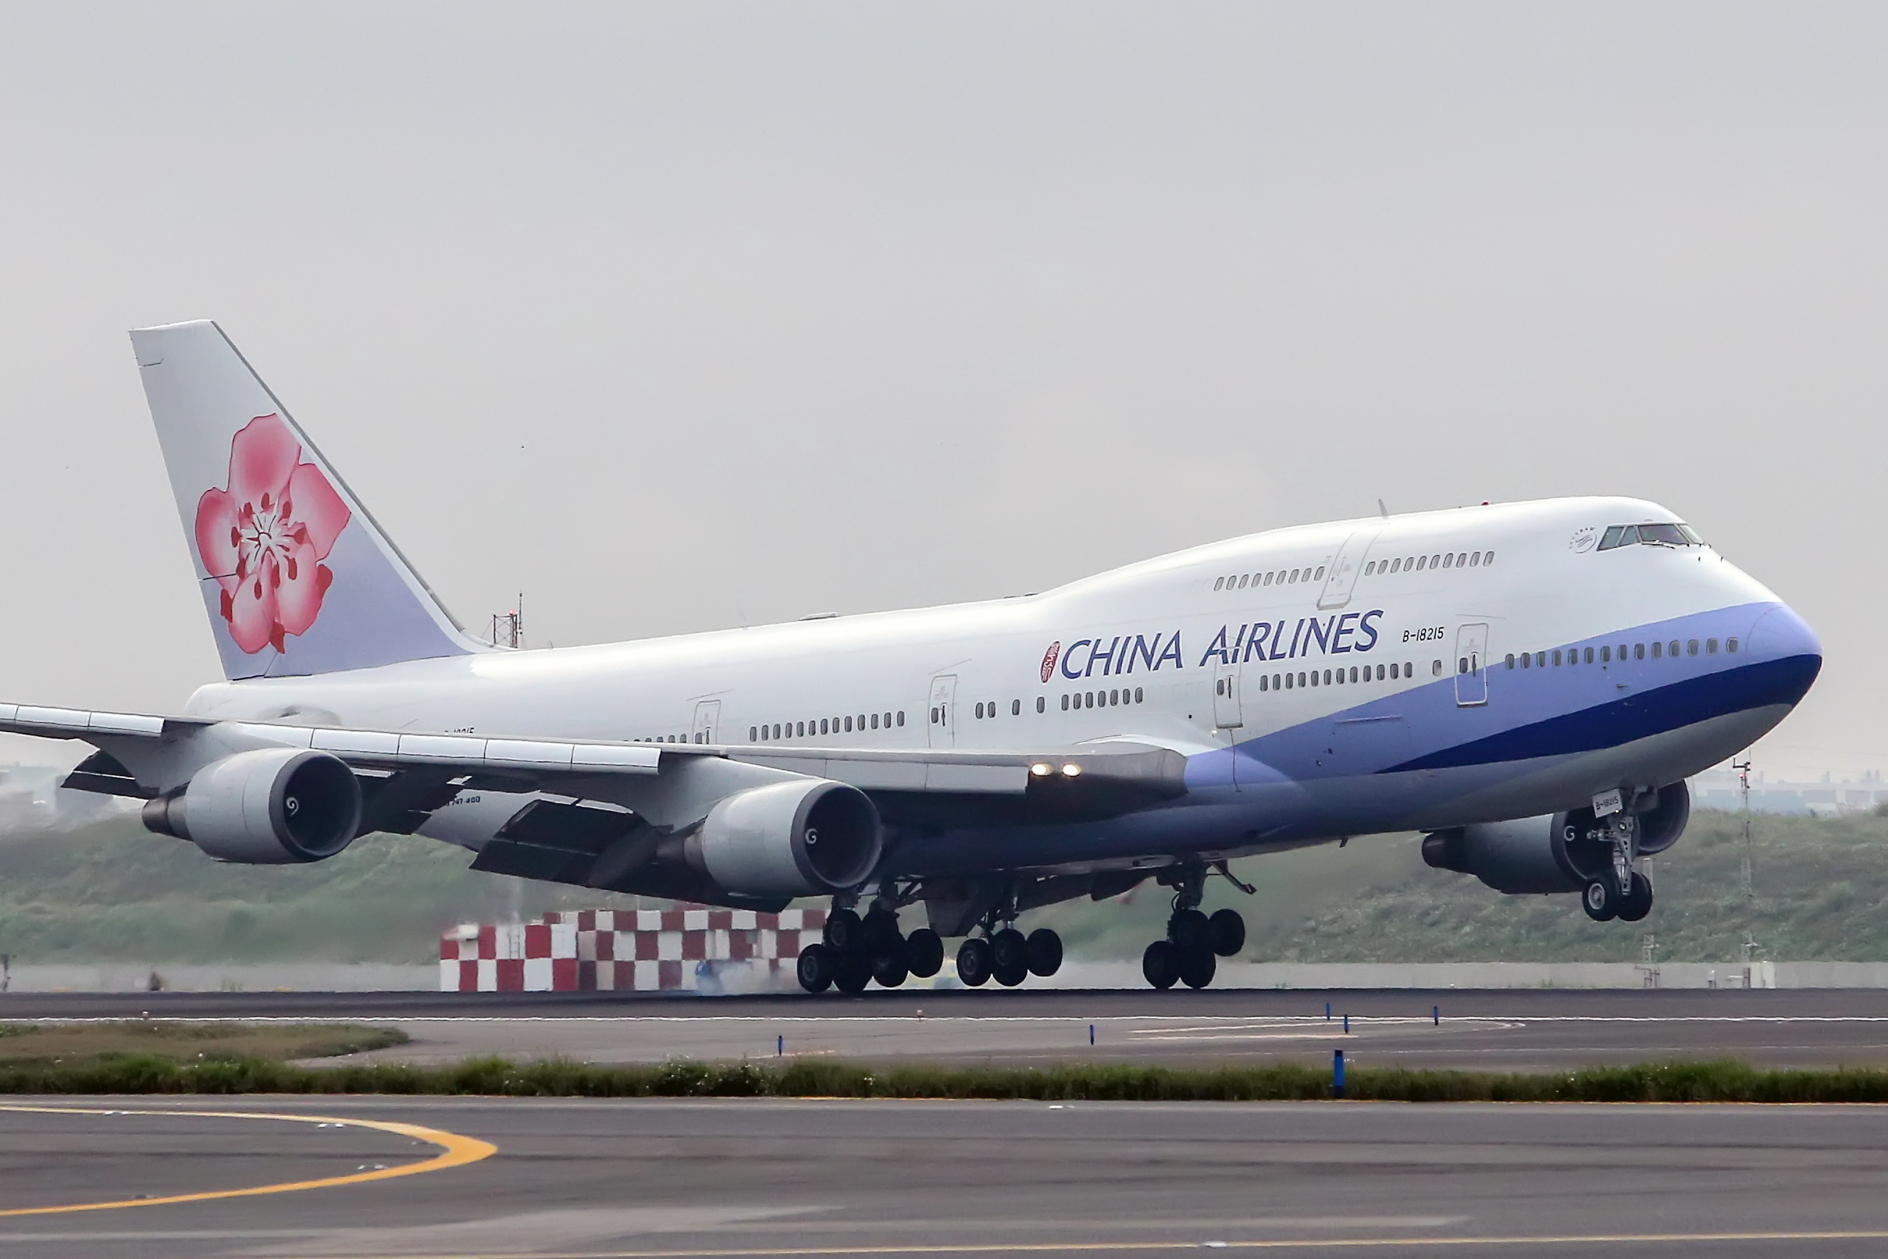 China Airlines Boeing 747-400 reg: B-18215. Click to enlarge.